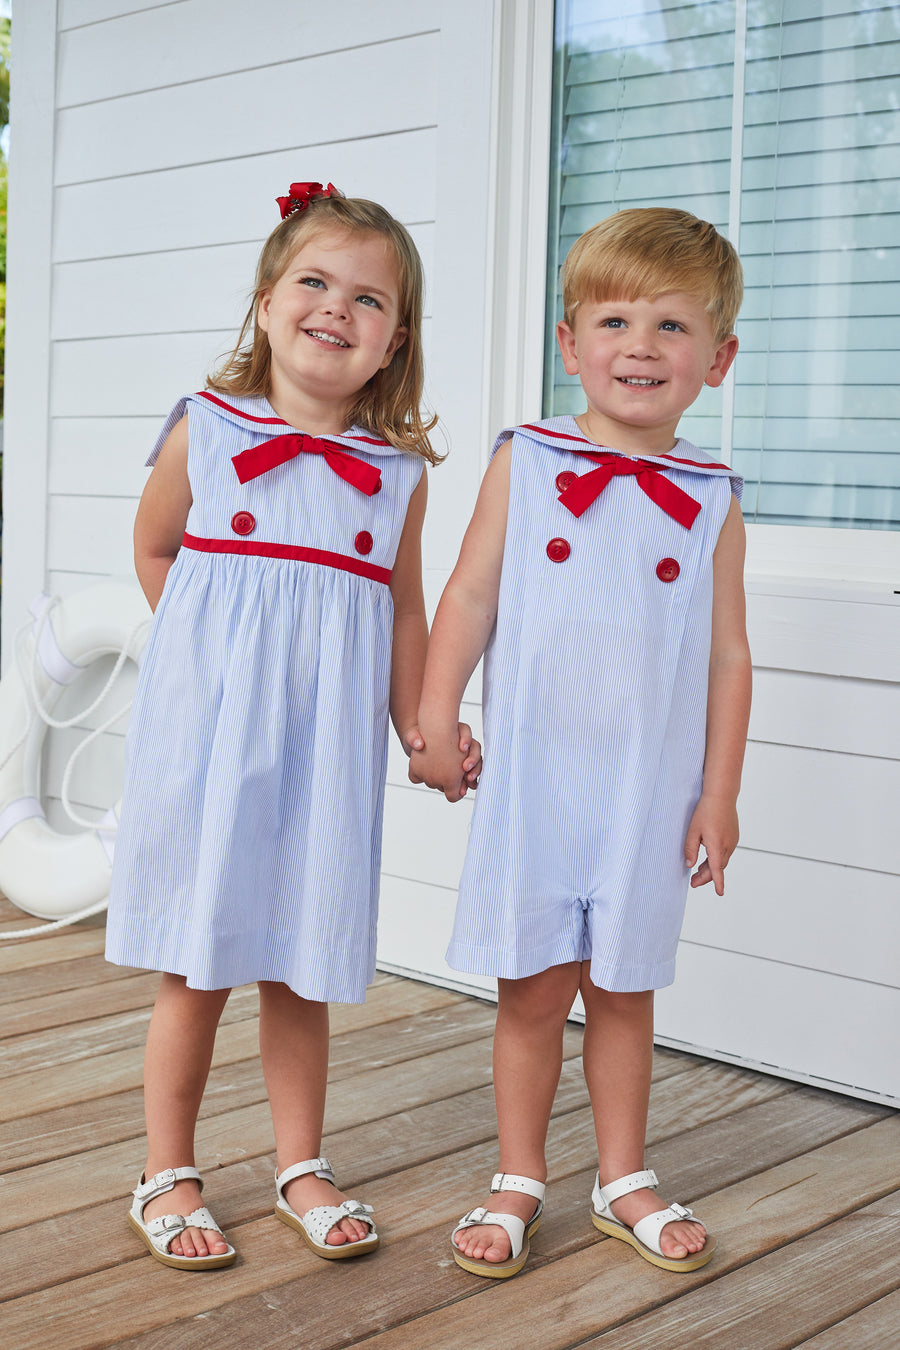 Little English traditional children's clothing, girl's classic thin light blue stripe dress with sailor collar, fixed neck tie, and red button detail for Summer